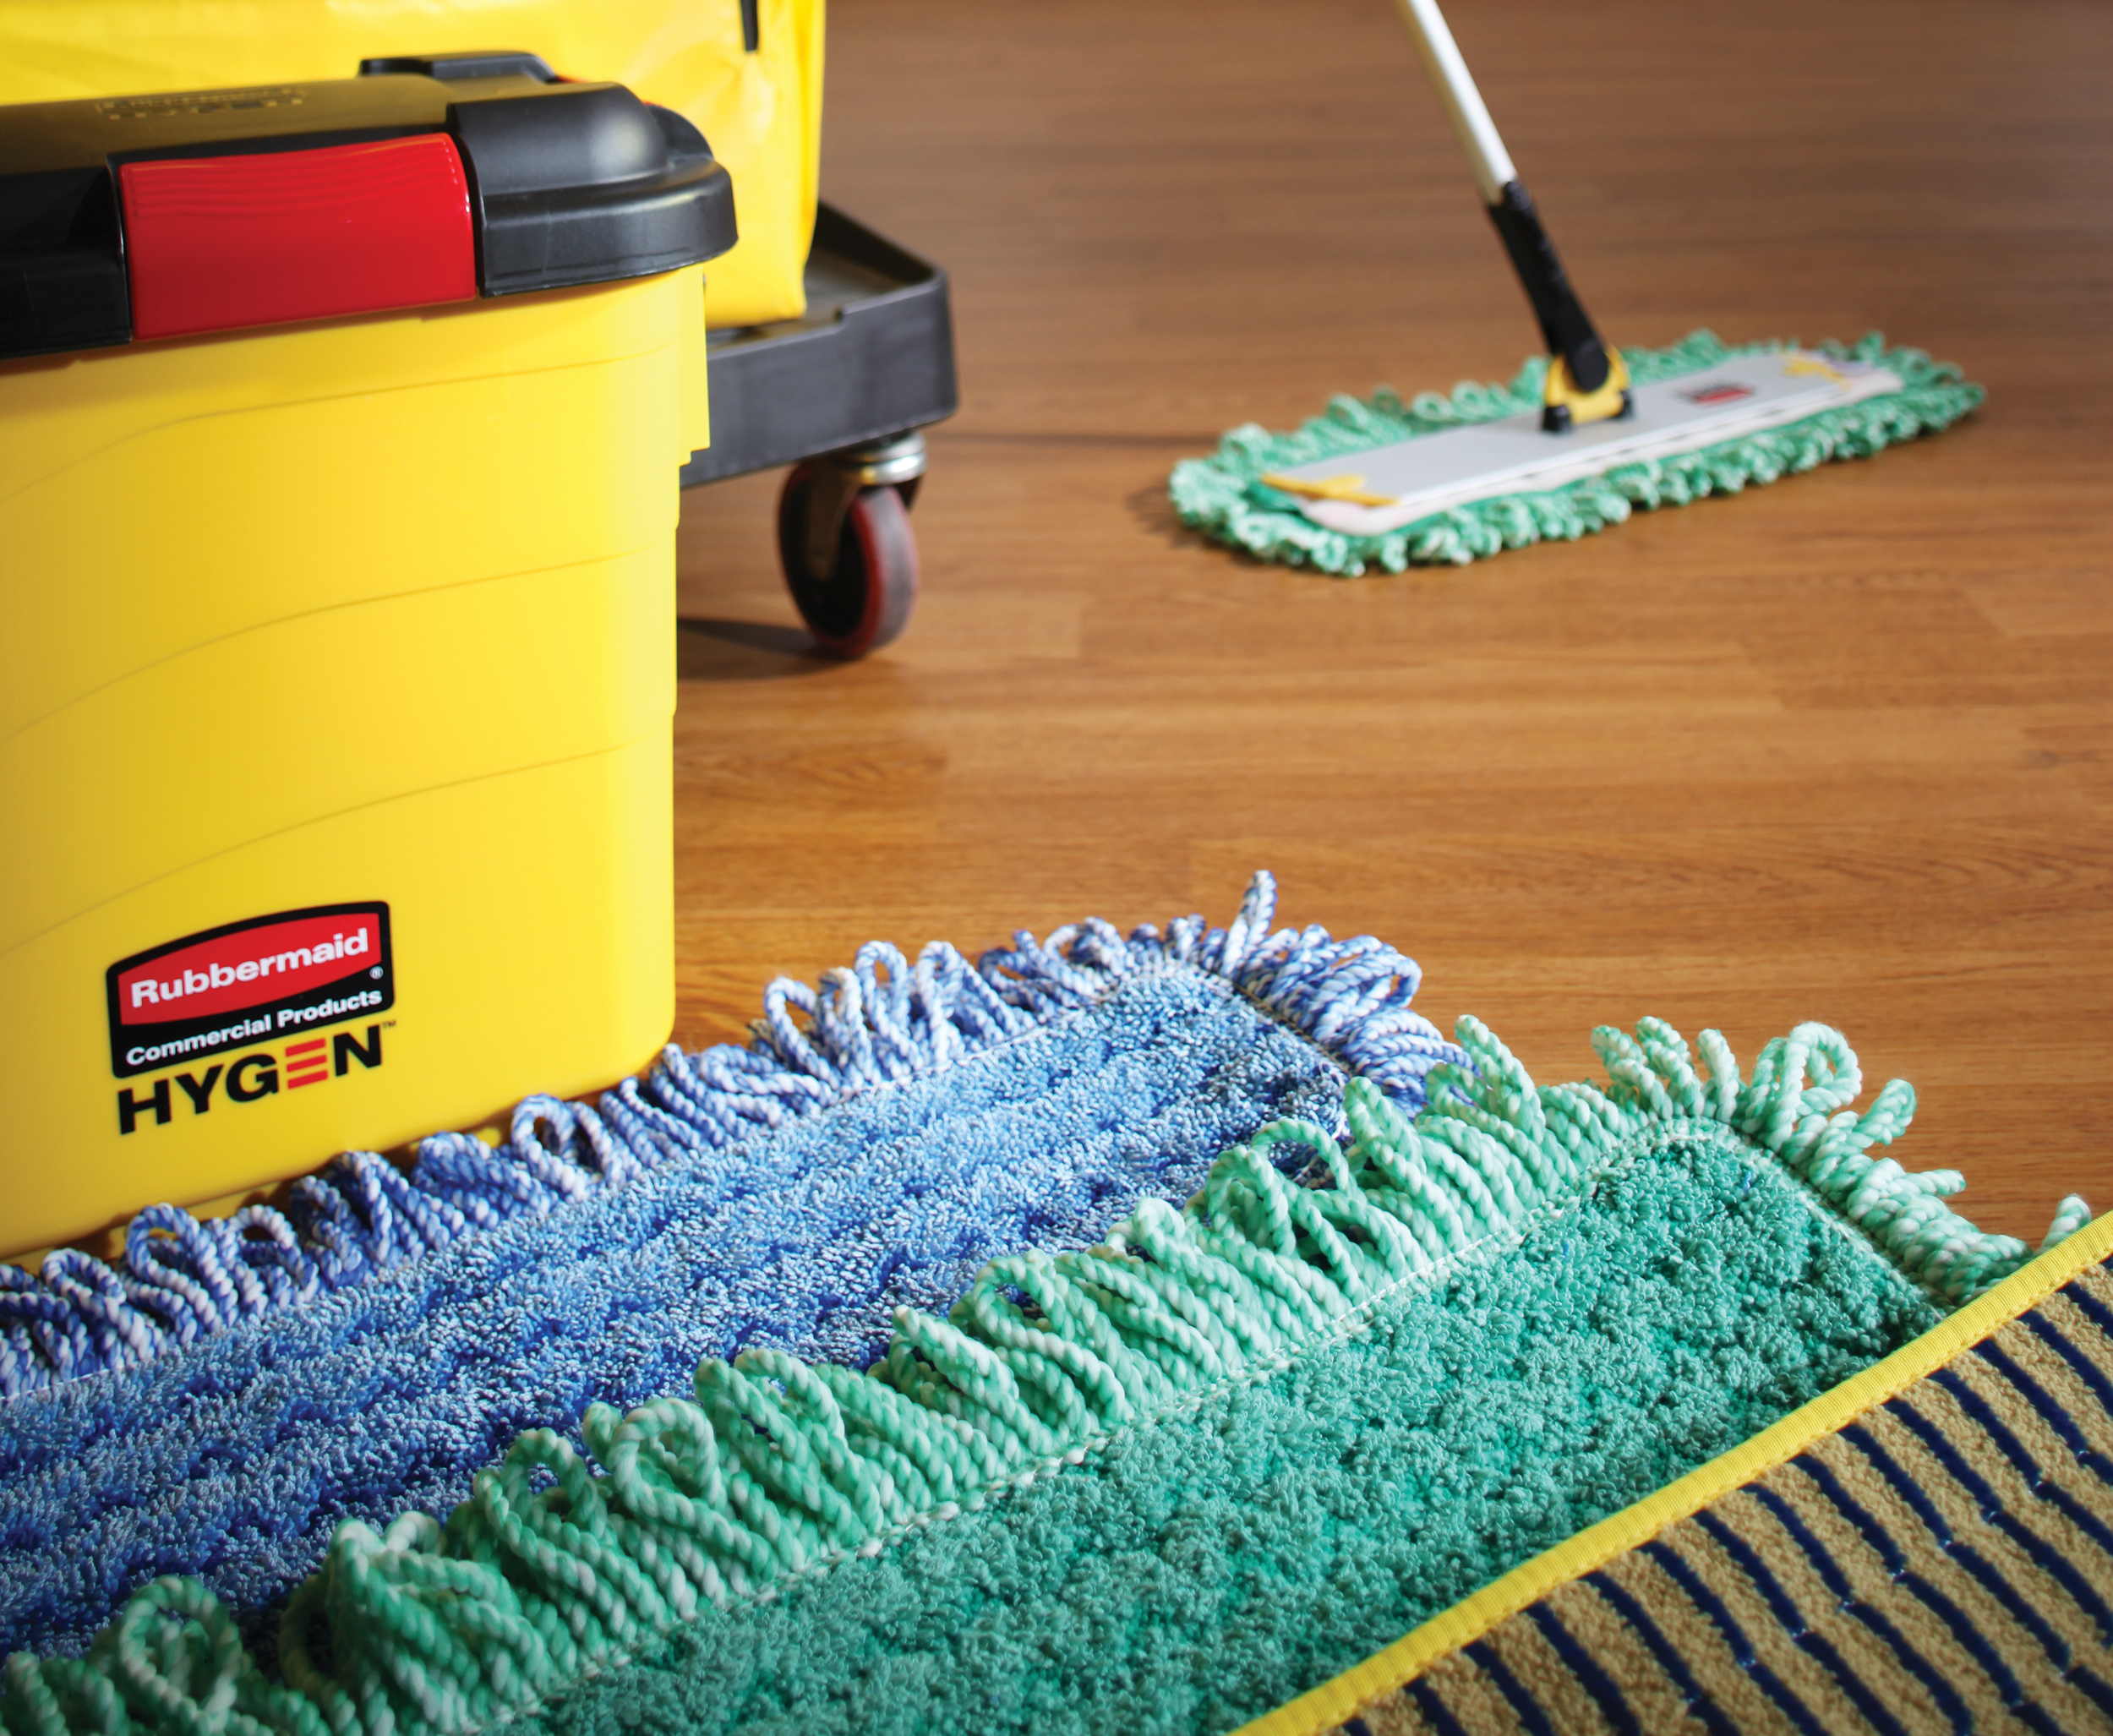 How To Use the Rubbermaid Hygen Clean Water Mop 